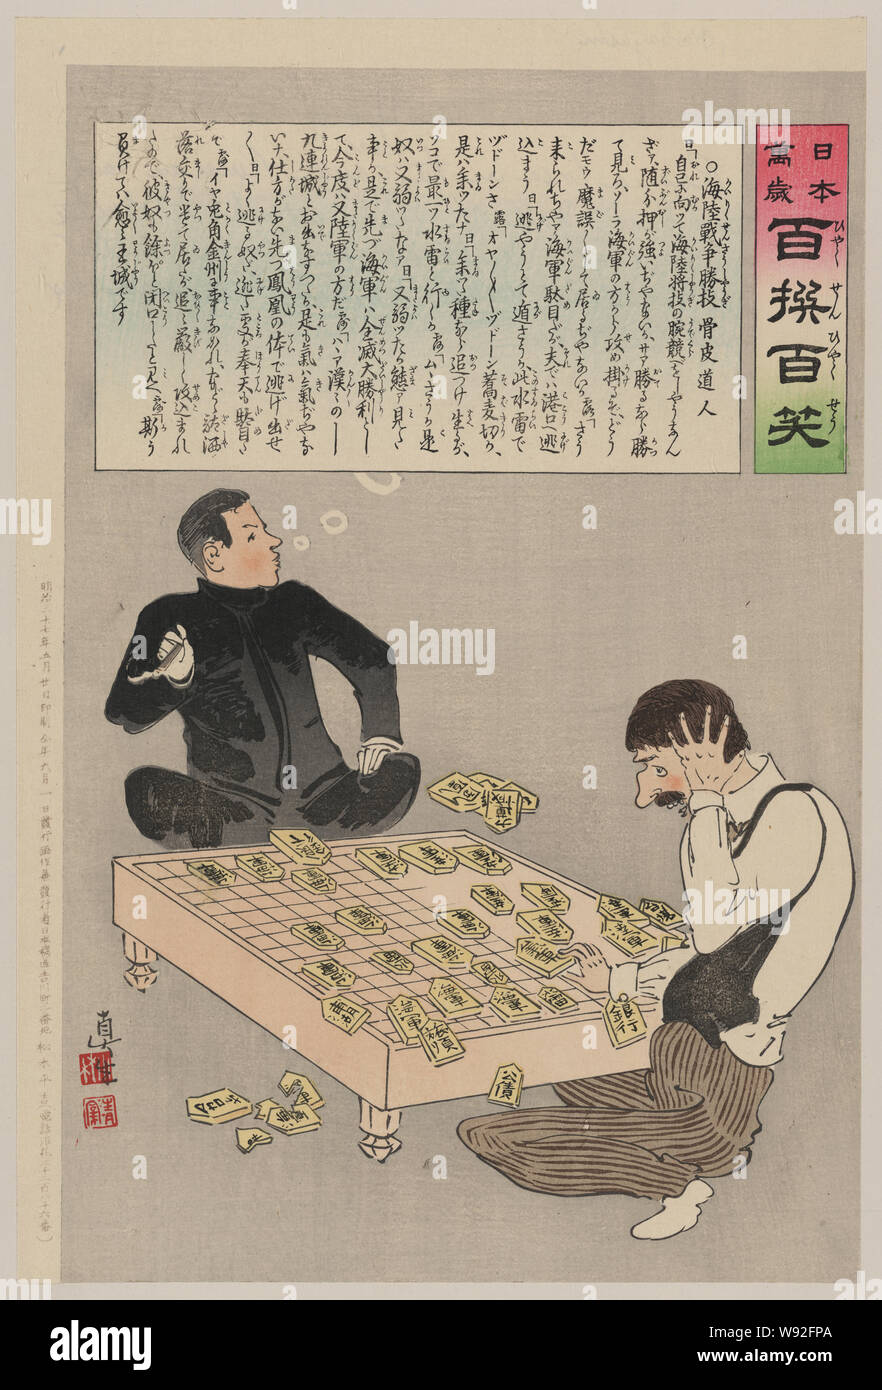 A Russian civilian gets upset during a game of dai shogi, while his Japanese opponent appears confident of victory Stock Photo